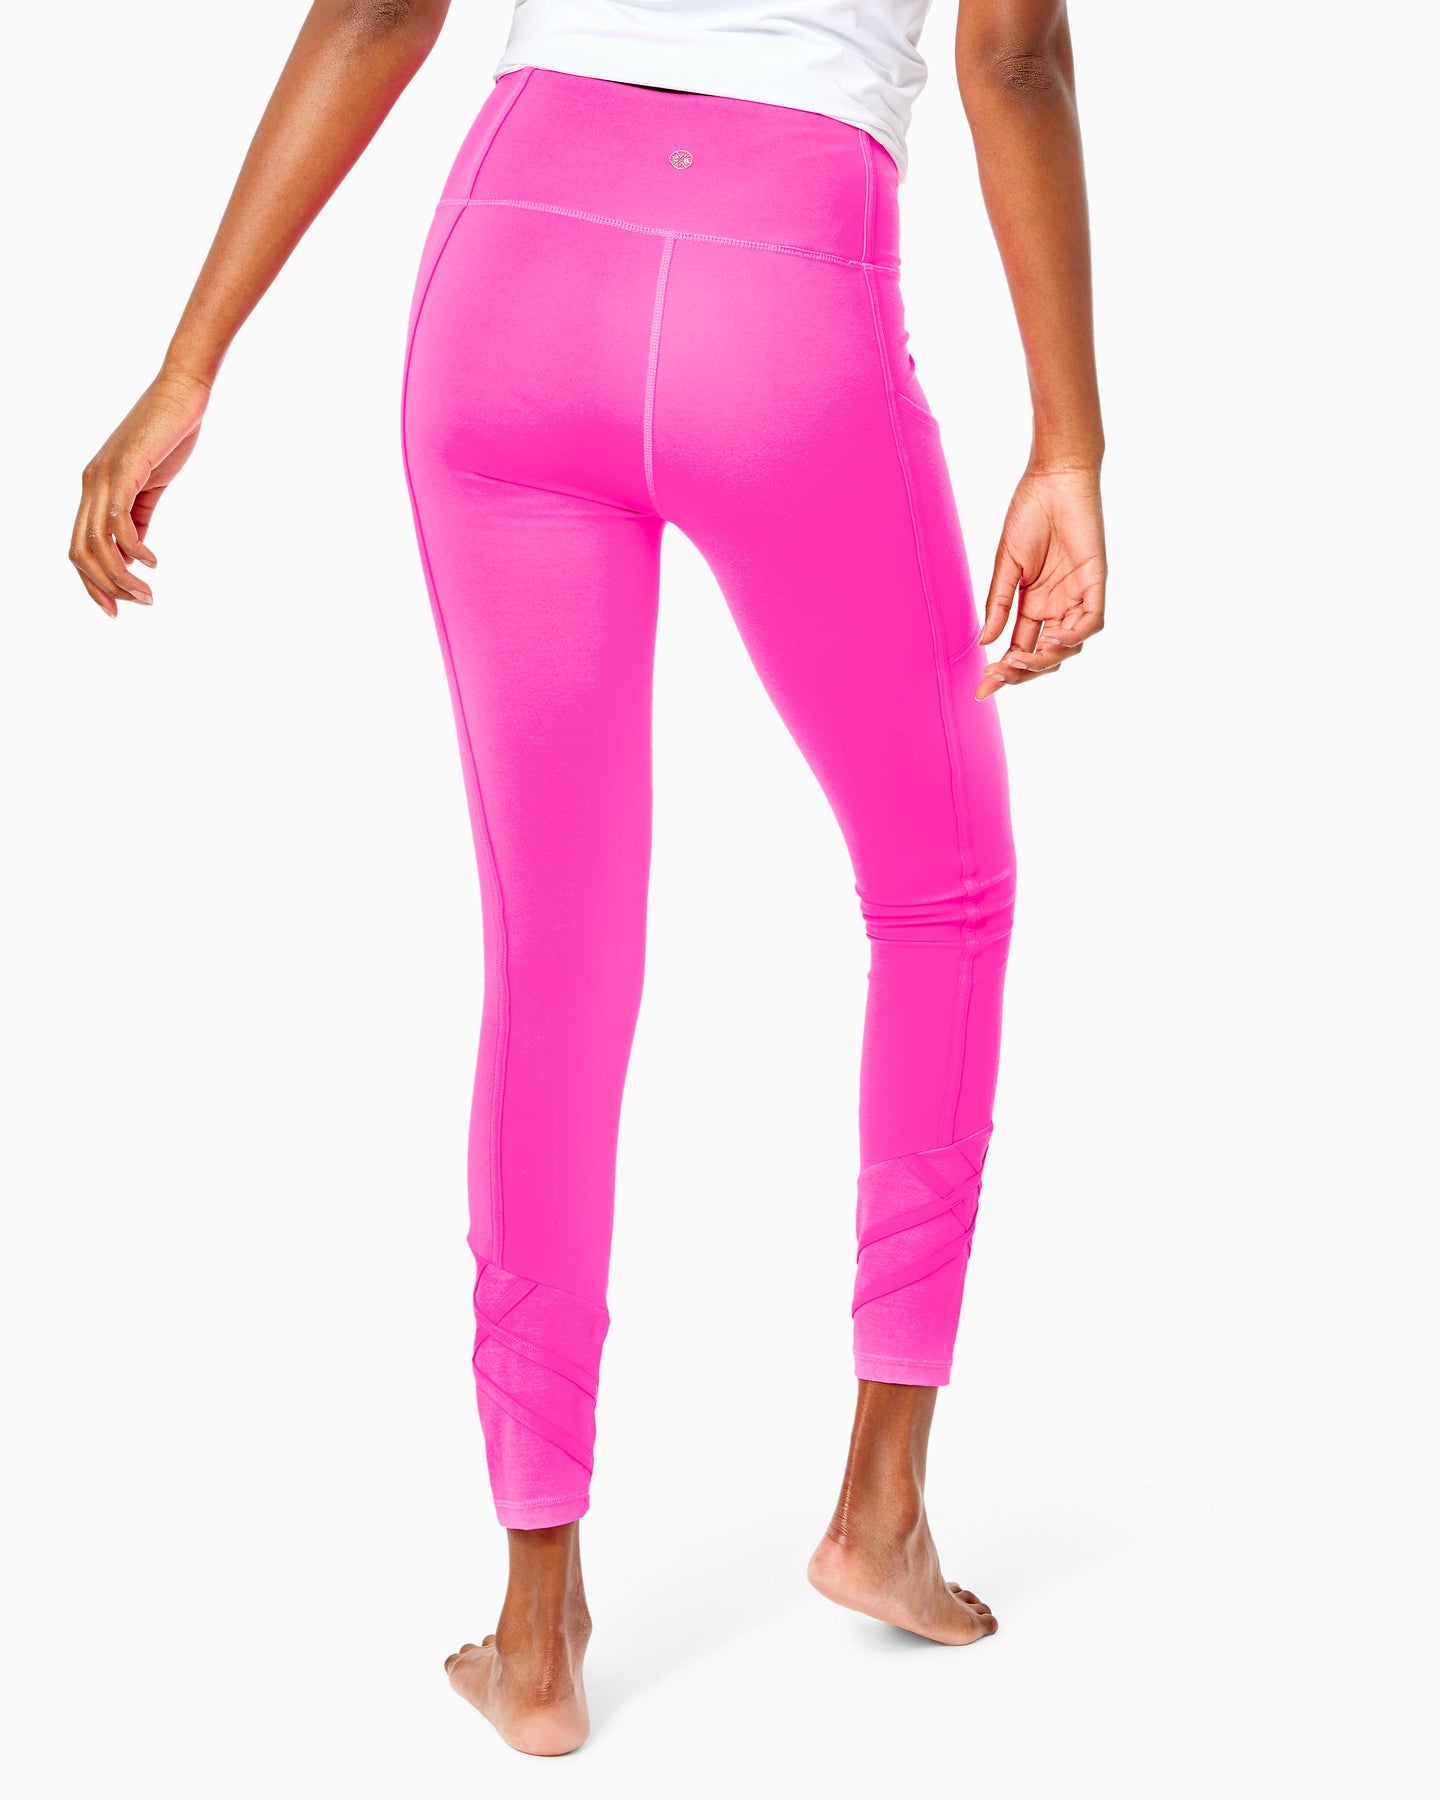 Lilly Pulitzer Weekender High Rise Legging in Bougainvillea Pink